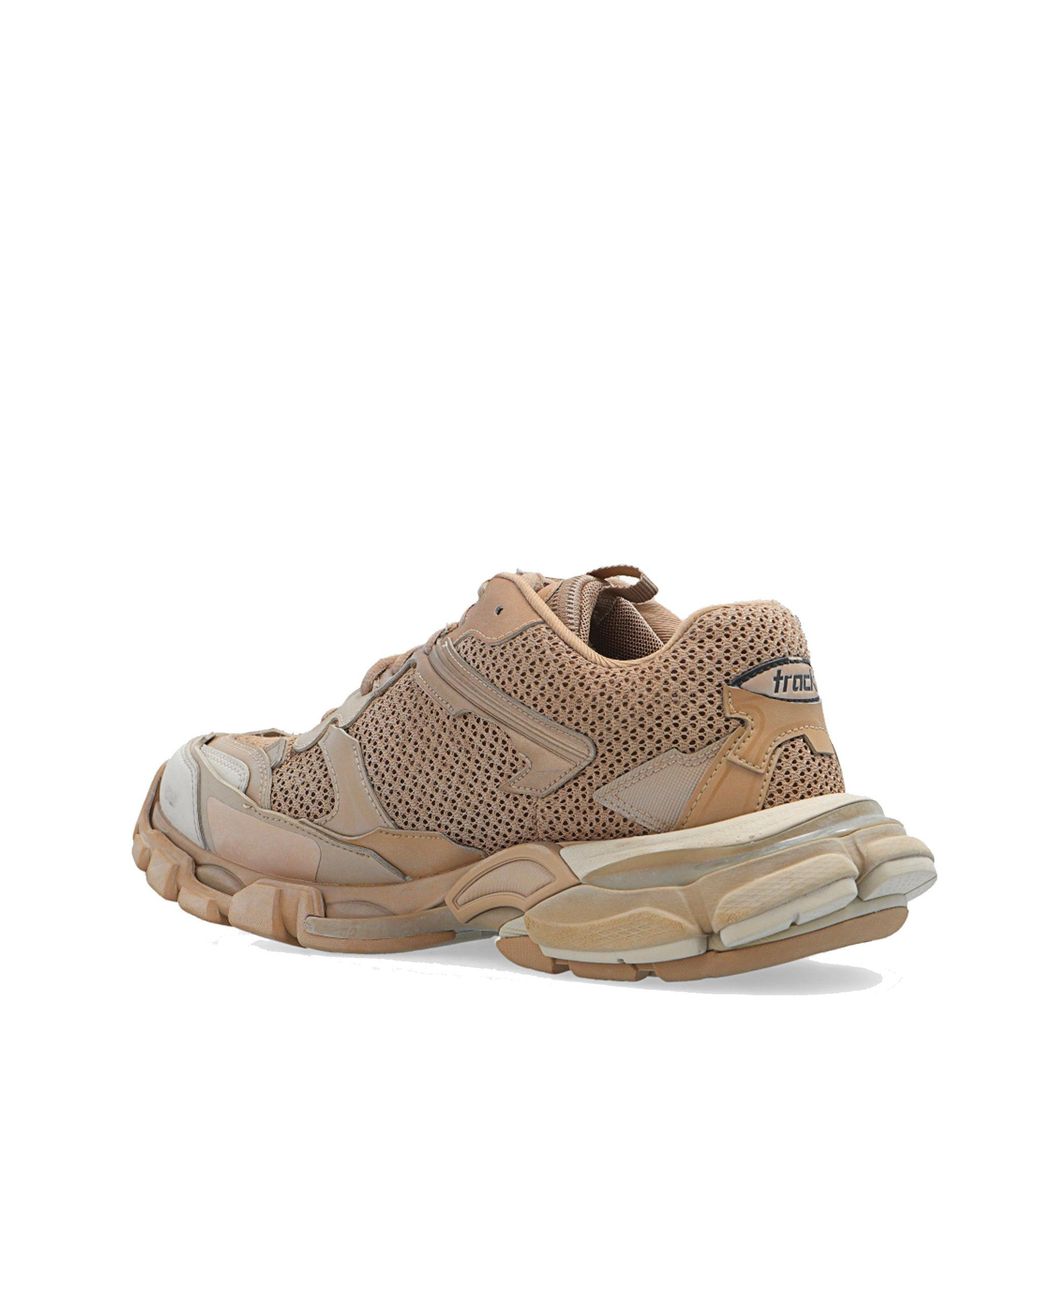 Balenciaga Track.3 Sneakers in Brown | Lyst